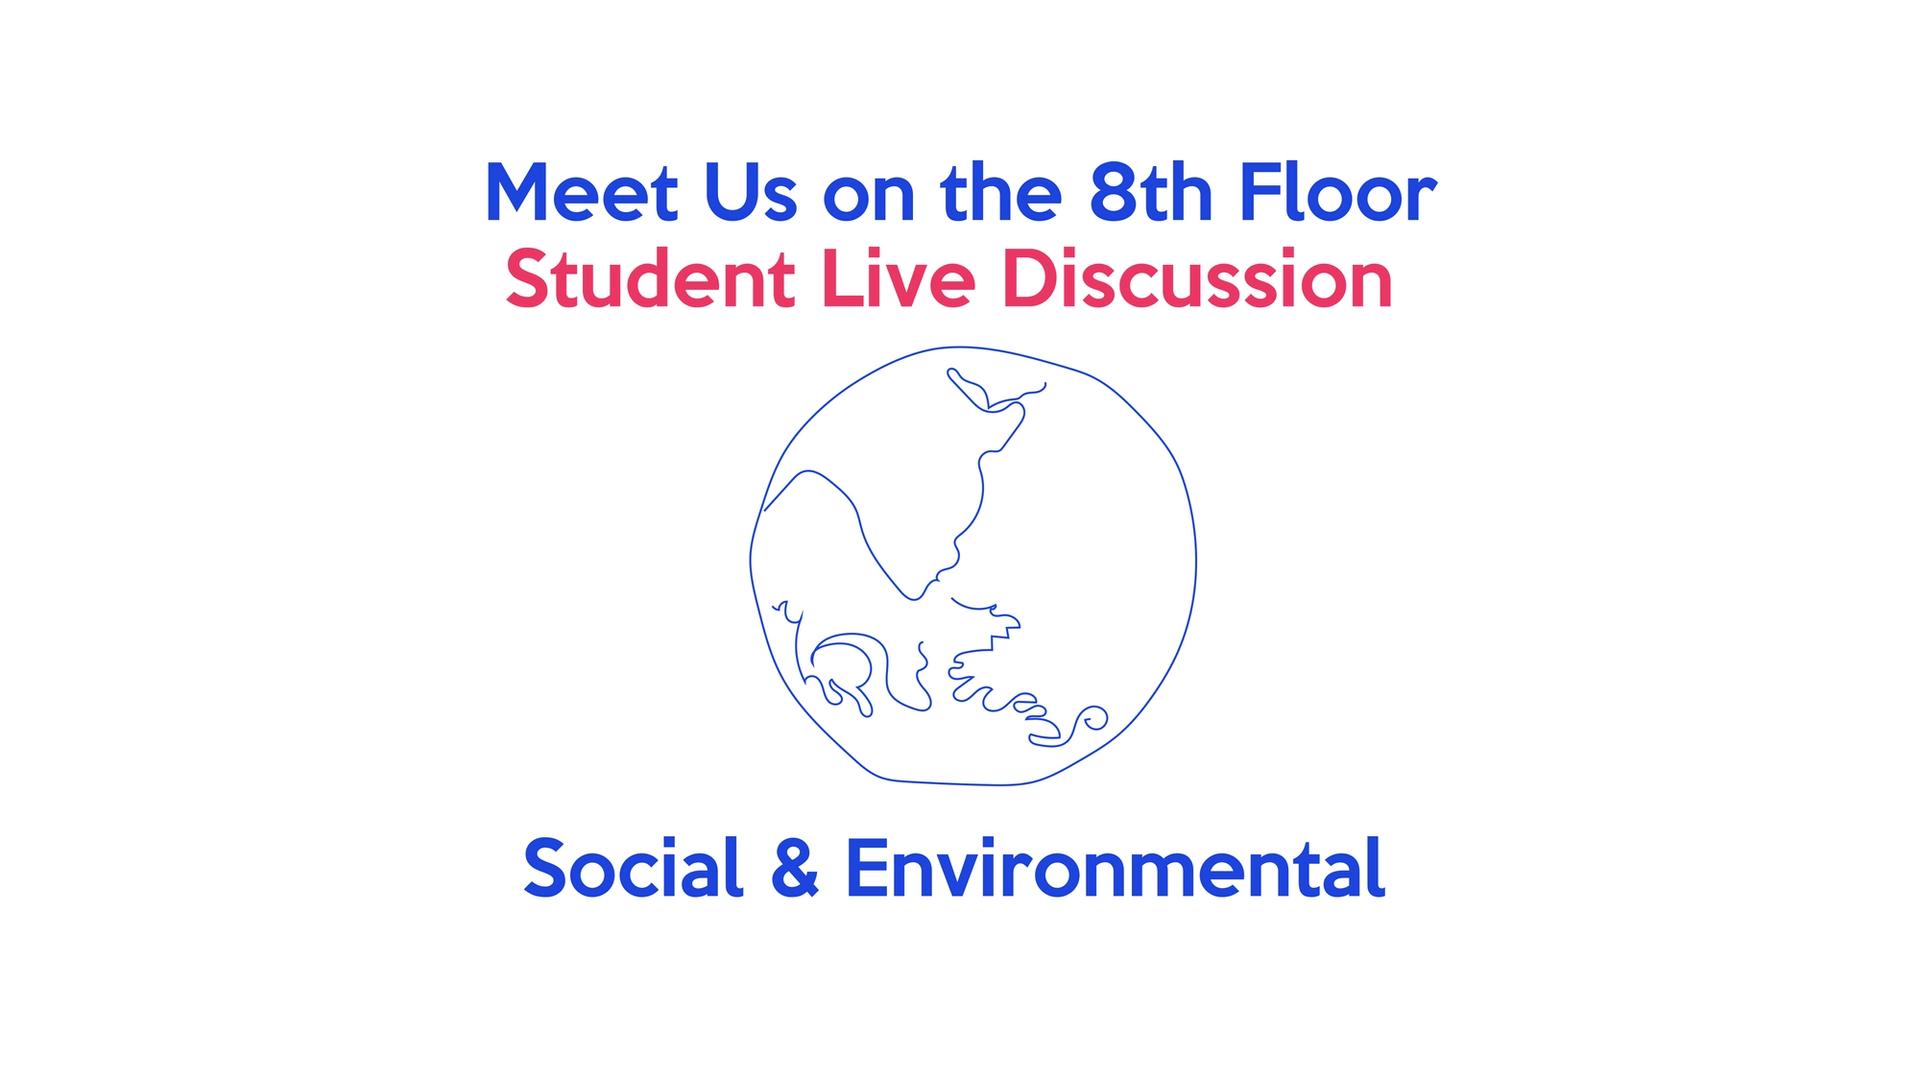 Meet Us on the 8th Floor: Student Live Discussion